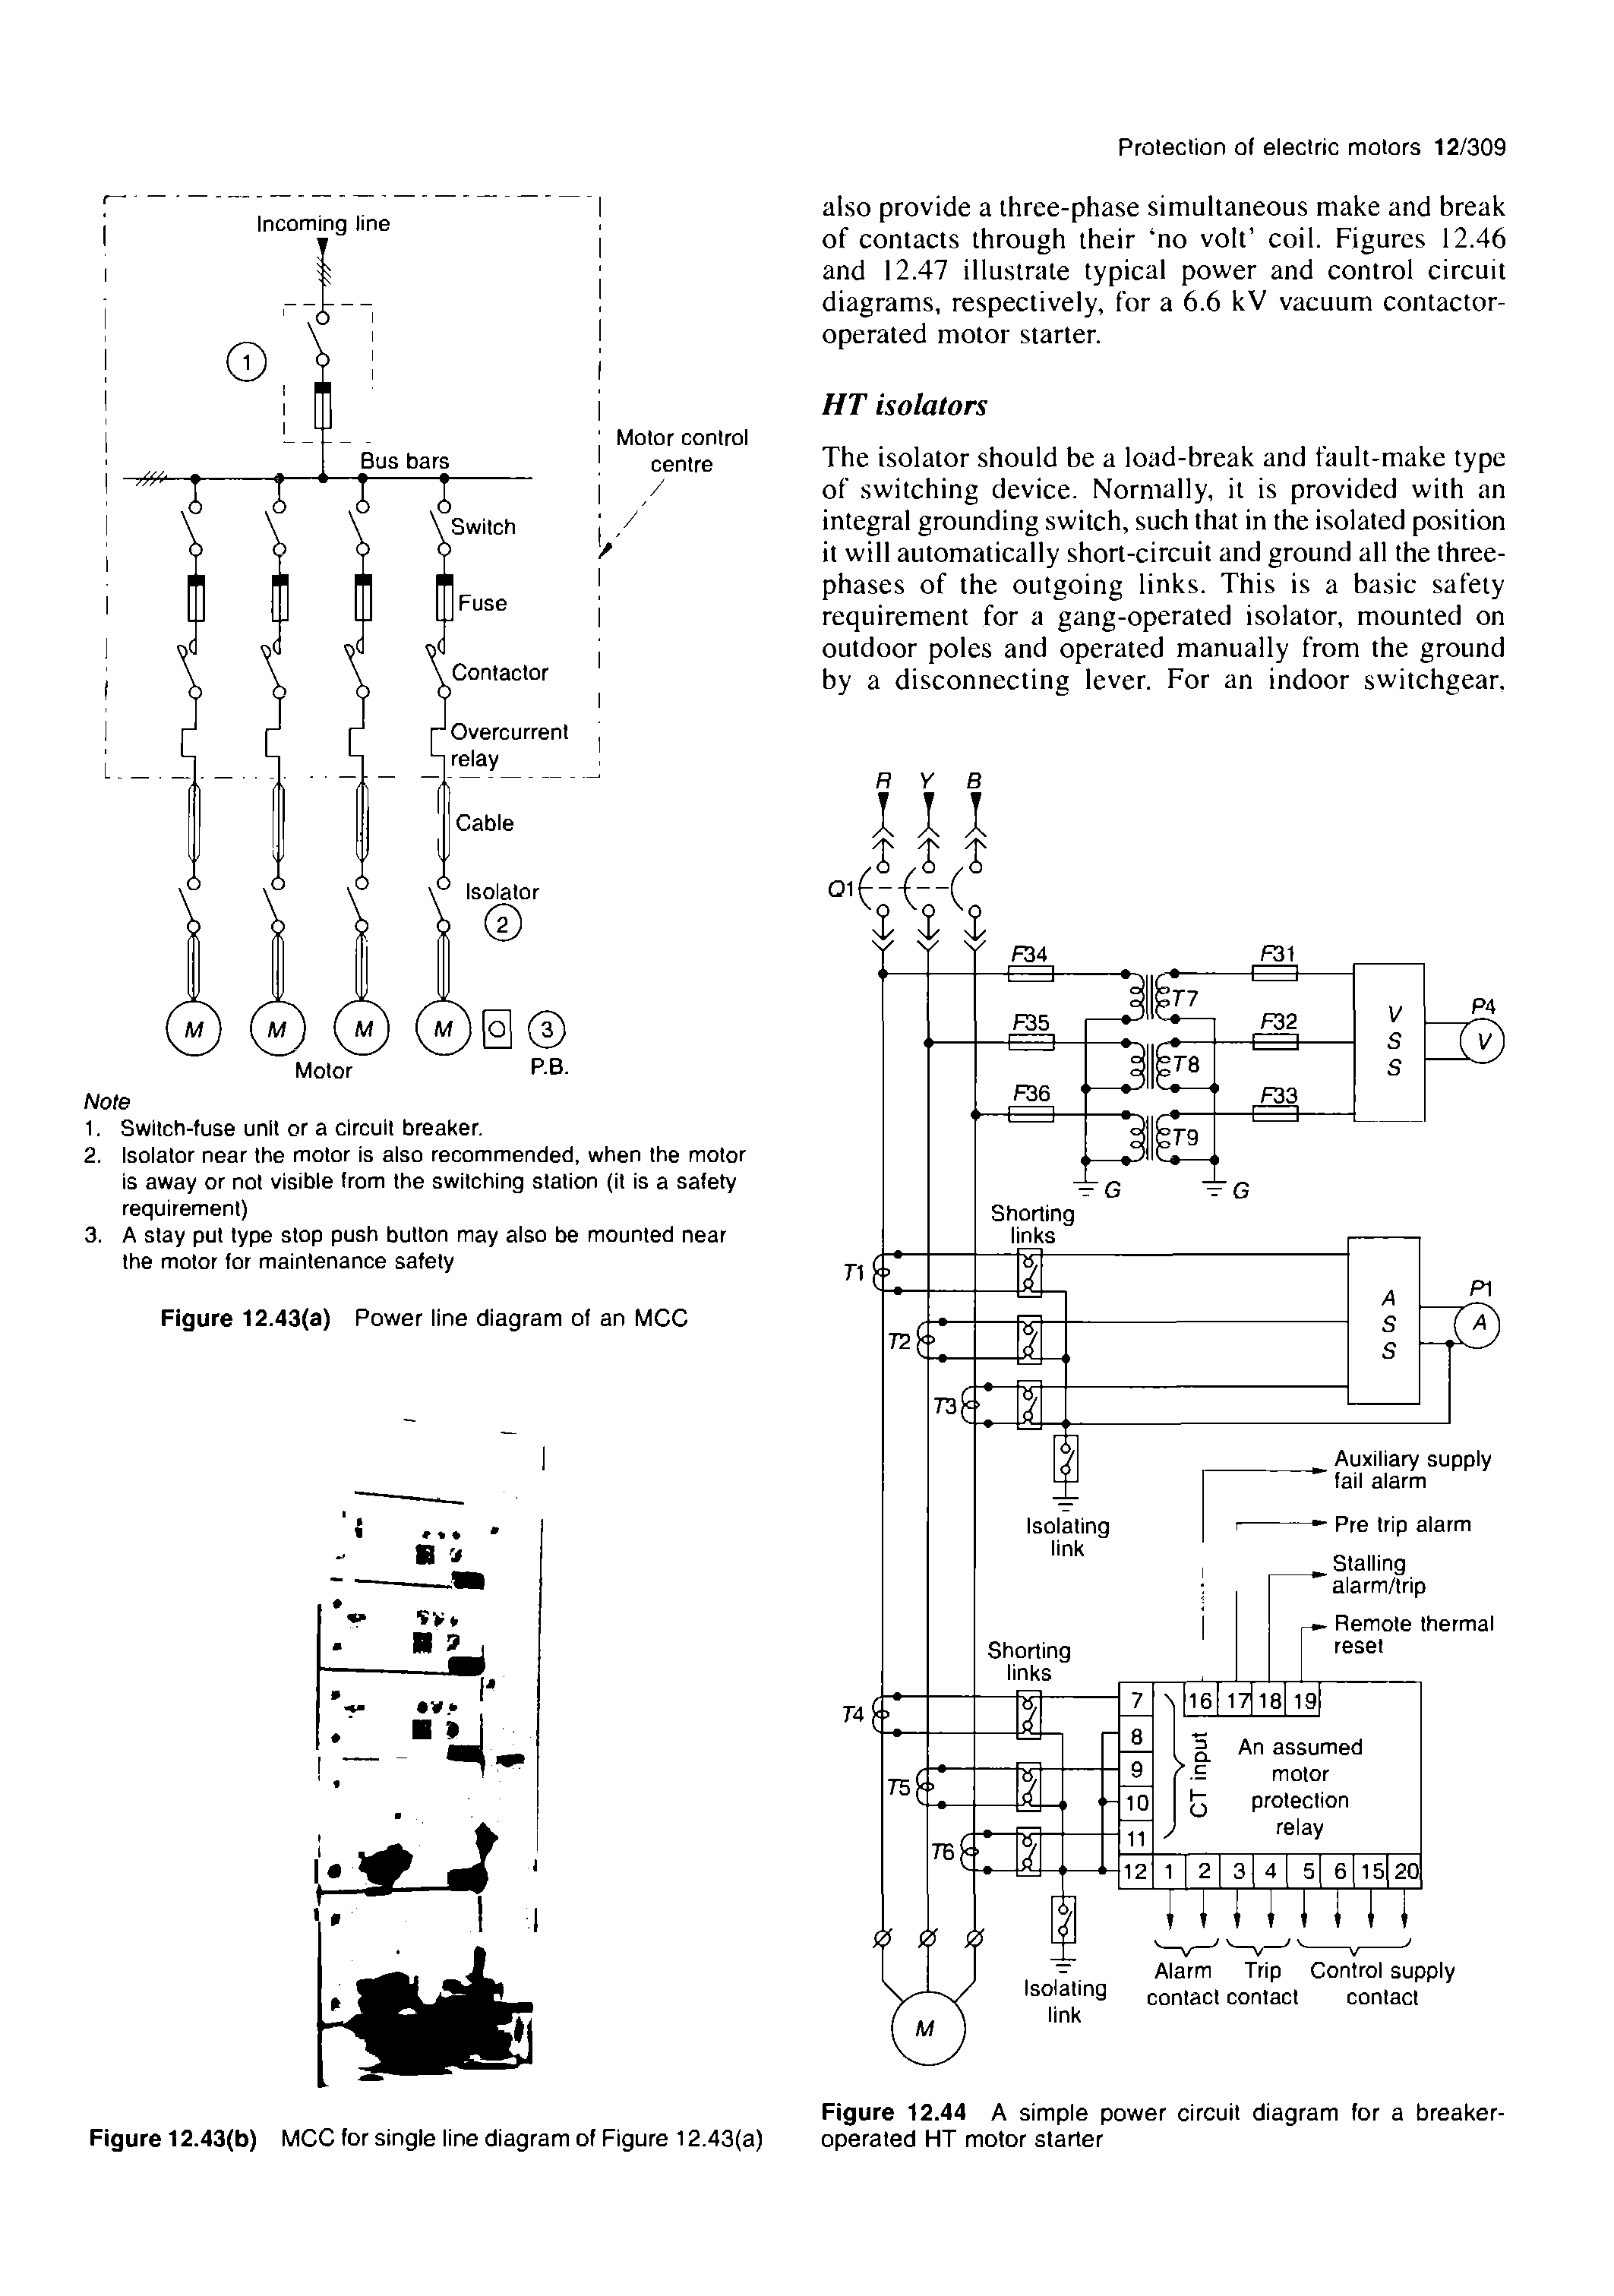 Figure 12.44 A simple power circuit diagram for a breaker-operated HT motor starter...